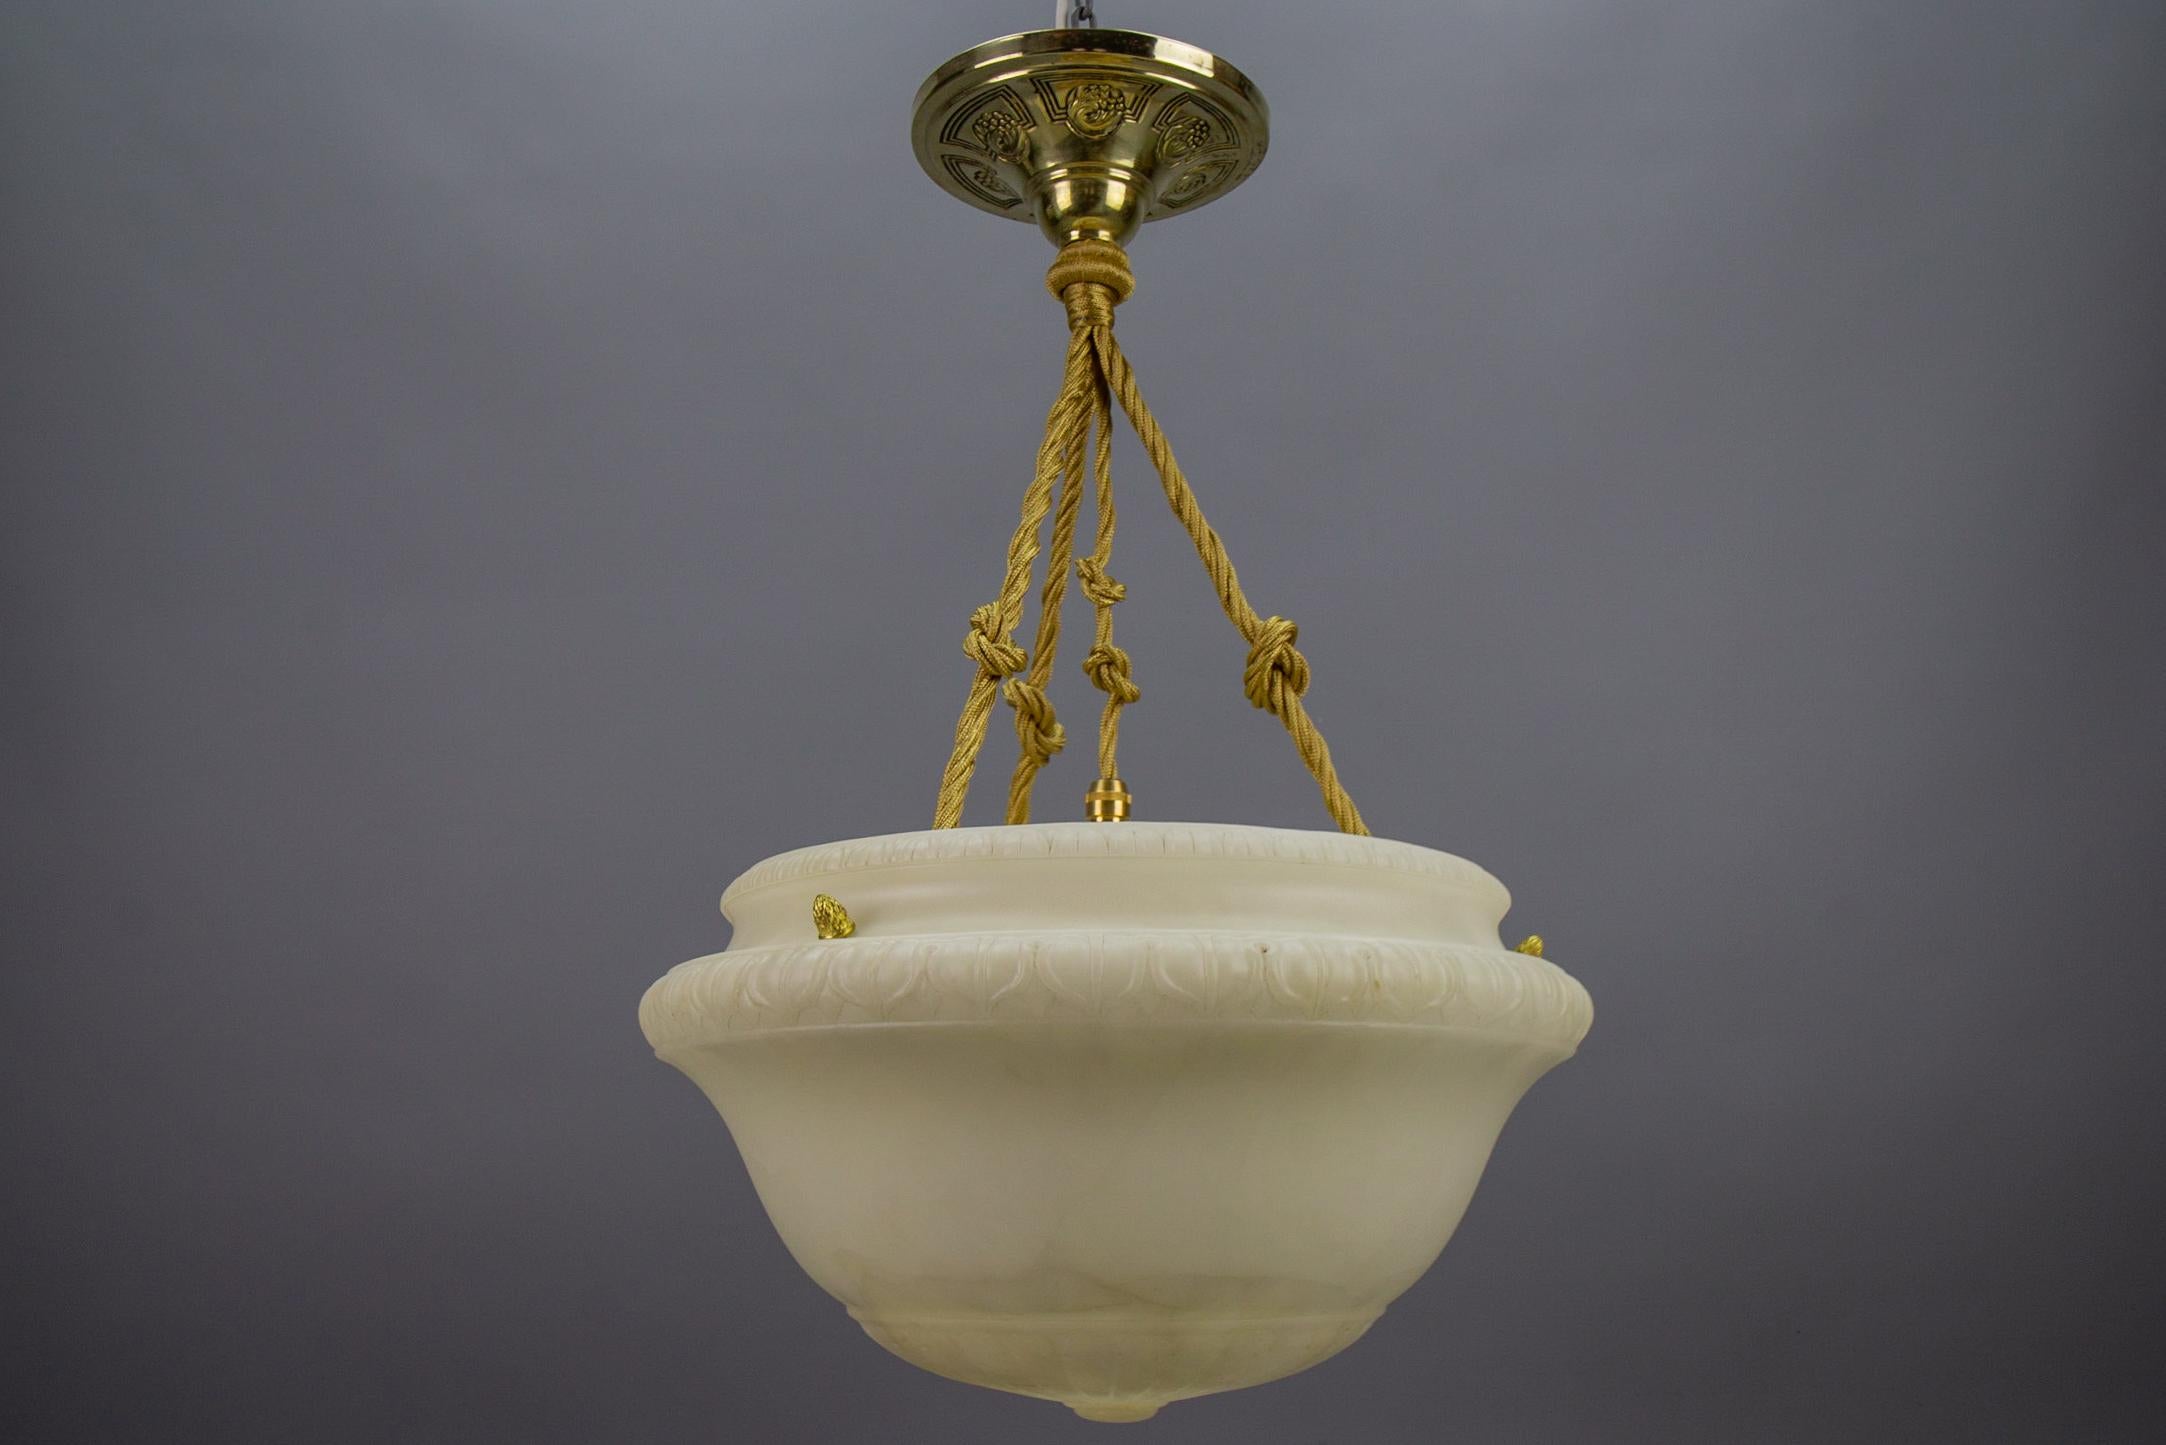 French Art Deco White Alabaster and Brass Pendant Light Fixture, circa 1920s For Sale 1